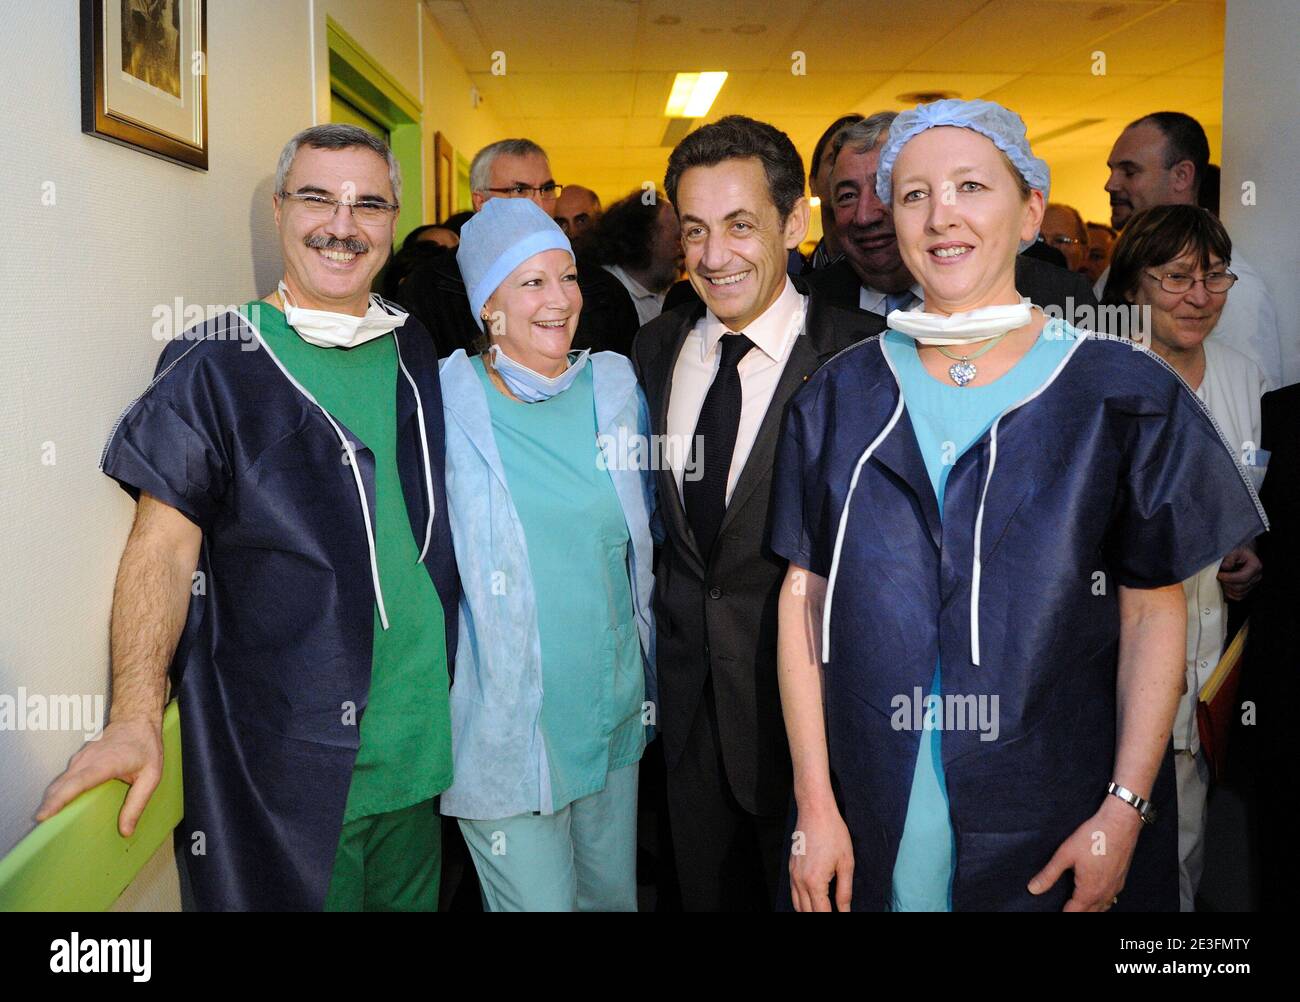 French President Nicolas Sarkozy poses with employees during his visit at the Rambouillet hospital, Paris suburb, France on March 13, 2009. Photo by Eric Feferberg/ABACAPRESS.COM Stock Photo